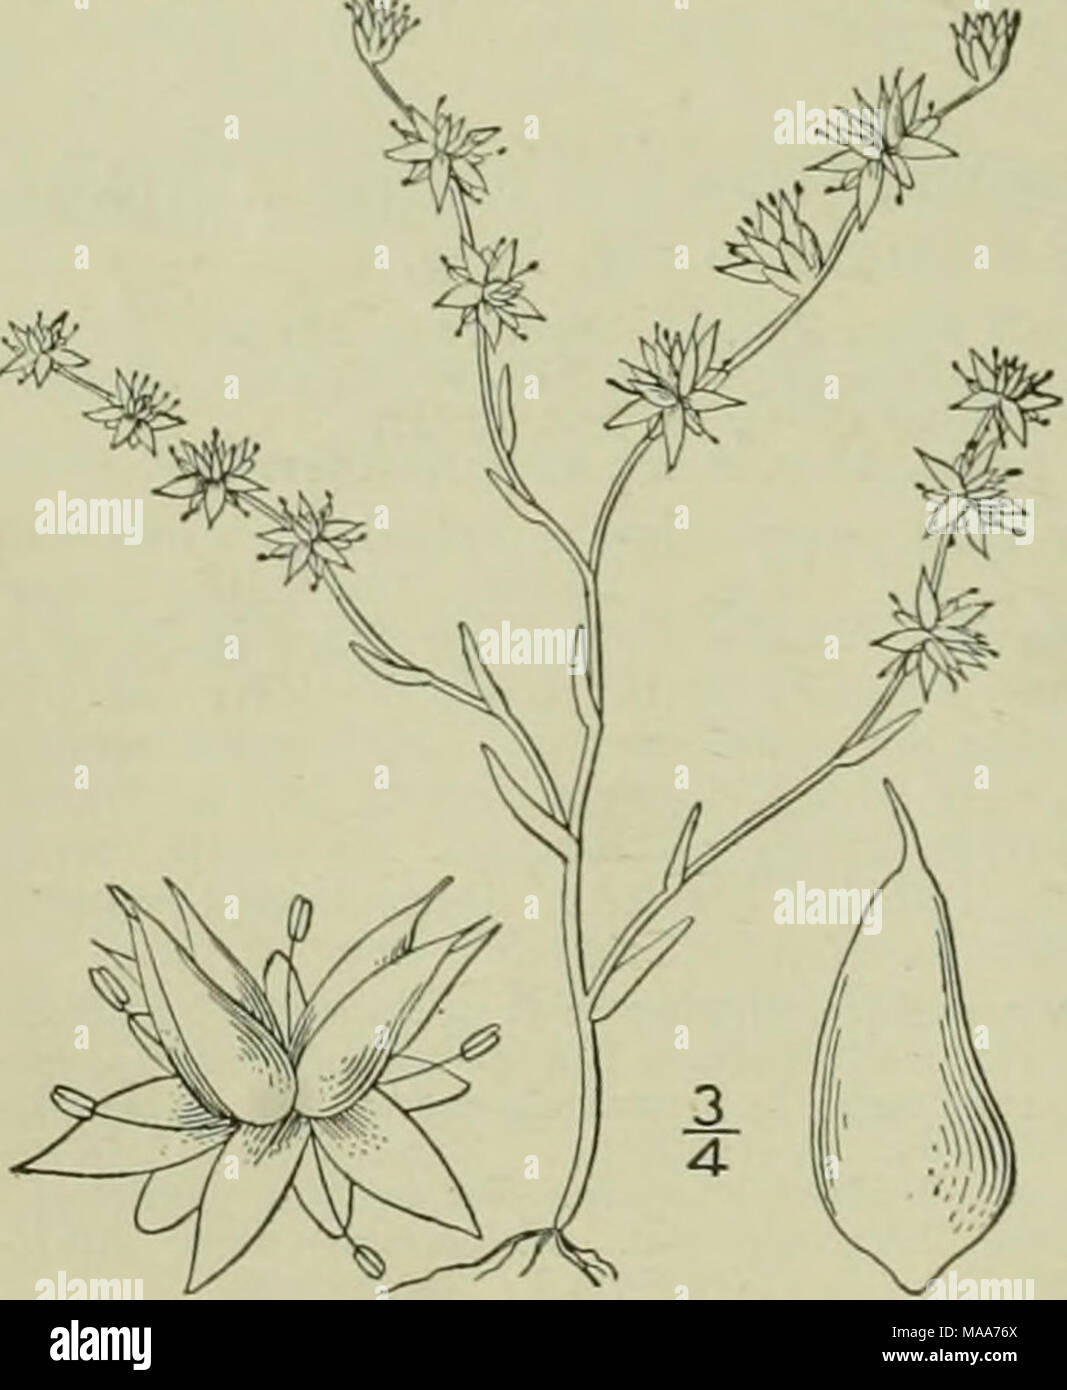 . An illustrated flora of the northern United States, Canada and the British possessions : from Newfoundland to the parallel of the southern boundary of Virginia and from the Atlantic Ocean westward to the 102nd meridian . 4. Sedum Nuttallianum Raf. Nuttall's Stonecrop. Fig. 2137. Sedum Nullallia 1832. Sedum Torreyi Don. Card. Diet. 3: 121. 1834. Sedum sfarsiftorum Nutt.; T. &amp; G. Fl. N. A. i: 559. 1840. Annual, low, tufted, glabrous,  2-3' high. Leaves alternate, scattered, linear-oblong, teretish, sessile, entire, 2&quot;-6&quot; long; cyme 2- S-forked, its branches ¥-2' long; flowers ses Stock Photo